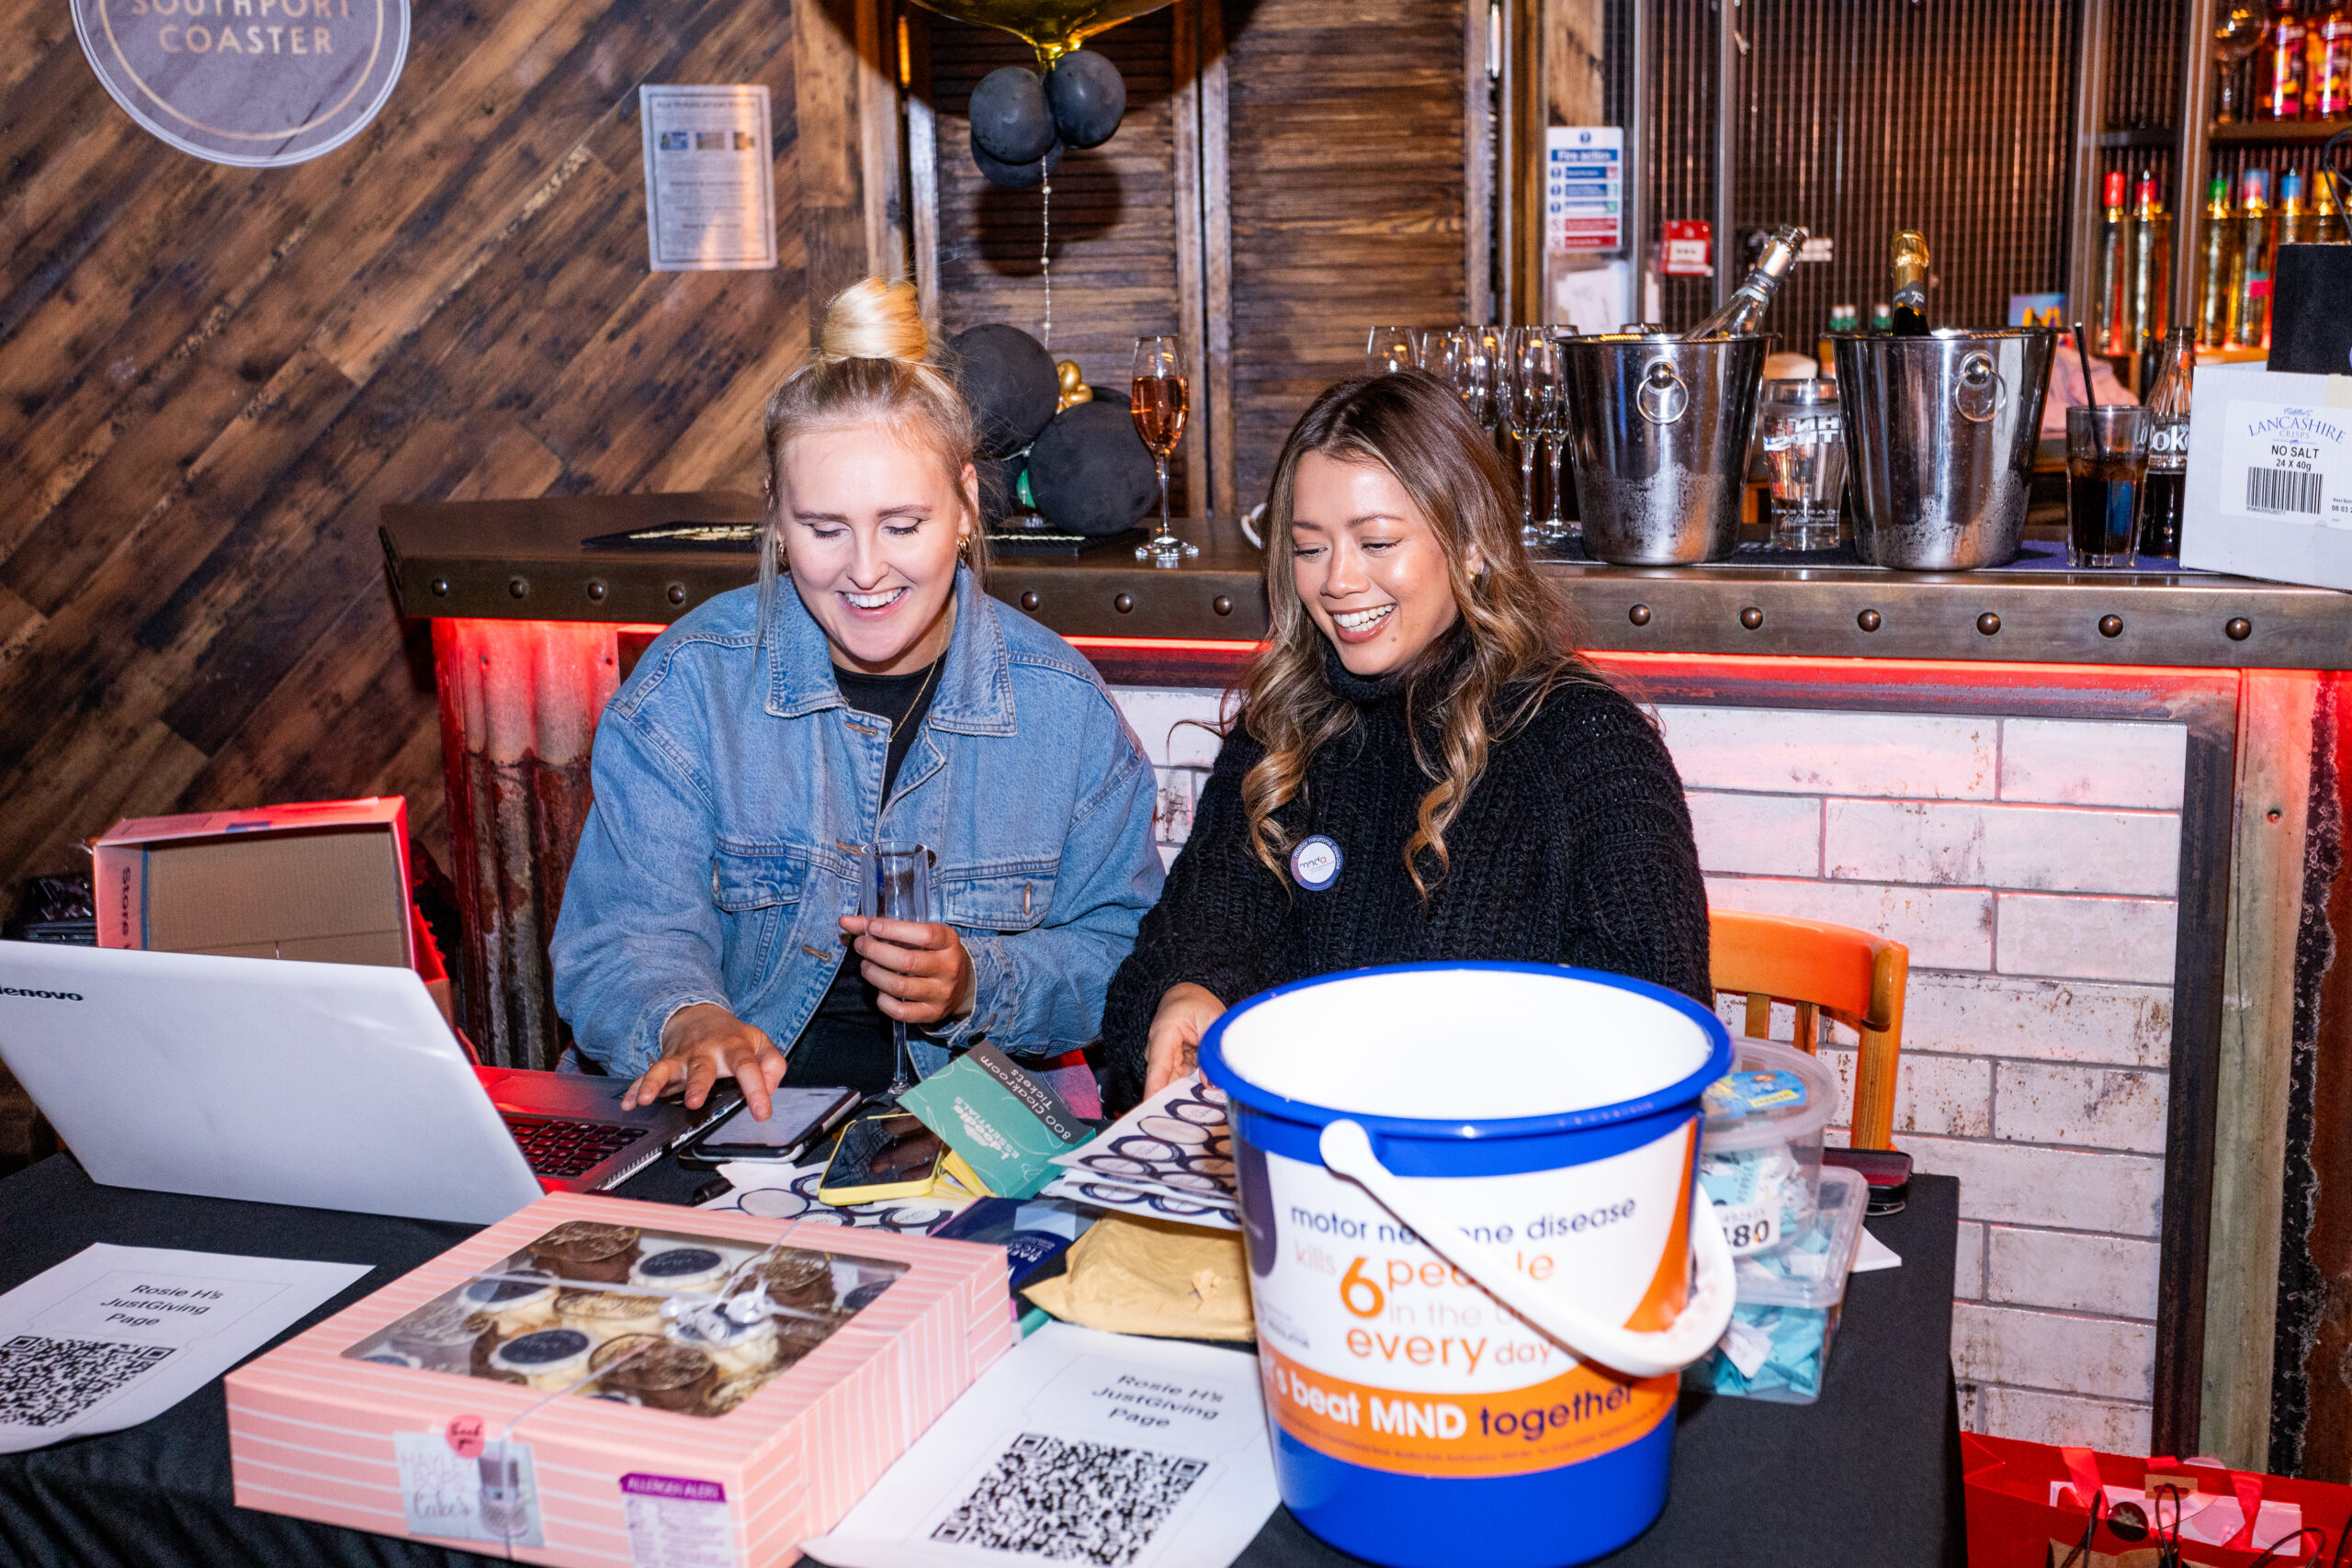 Over £1,100 was raised for the Merseyside MND Association through a Christmas Makeup Masterclass Fundraiser organised by Rosie Cleave and Amanda Borg at The Southport Coaster pub in Southport. Photo by Banak Photography